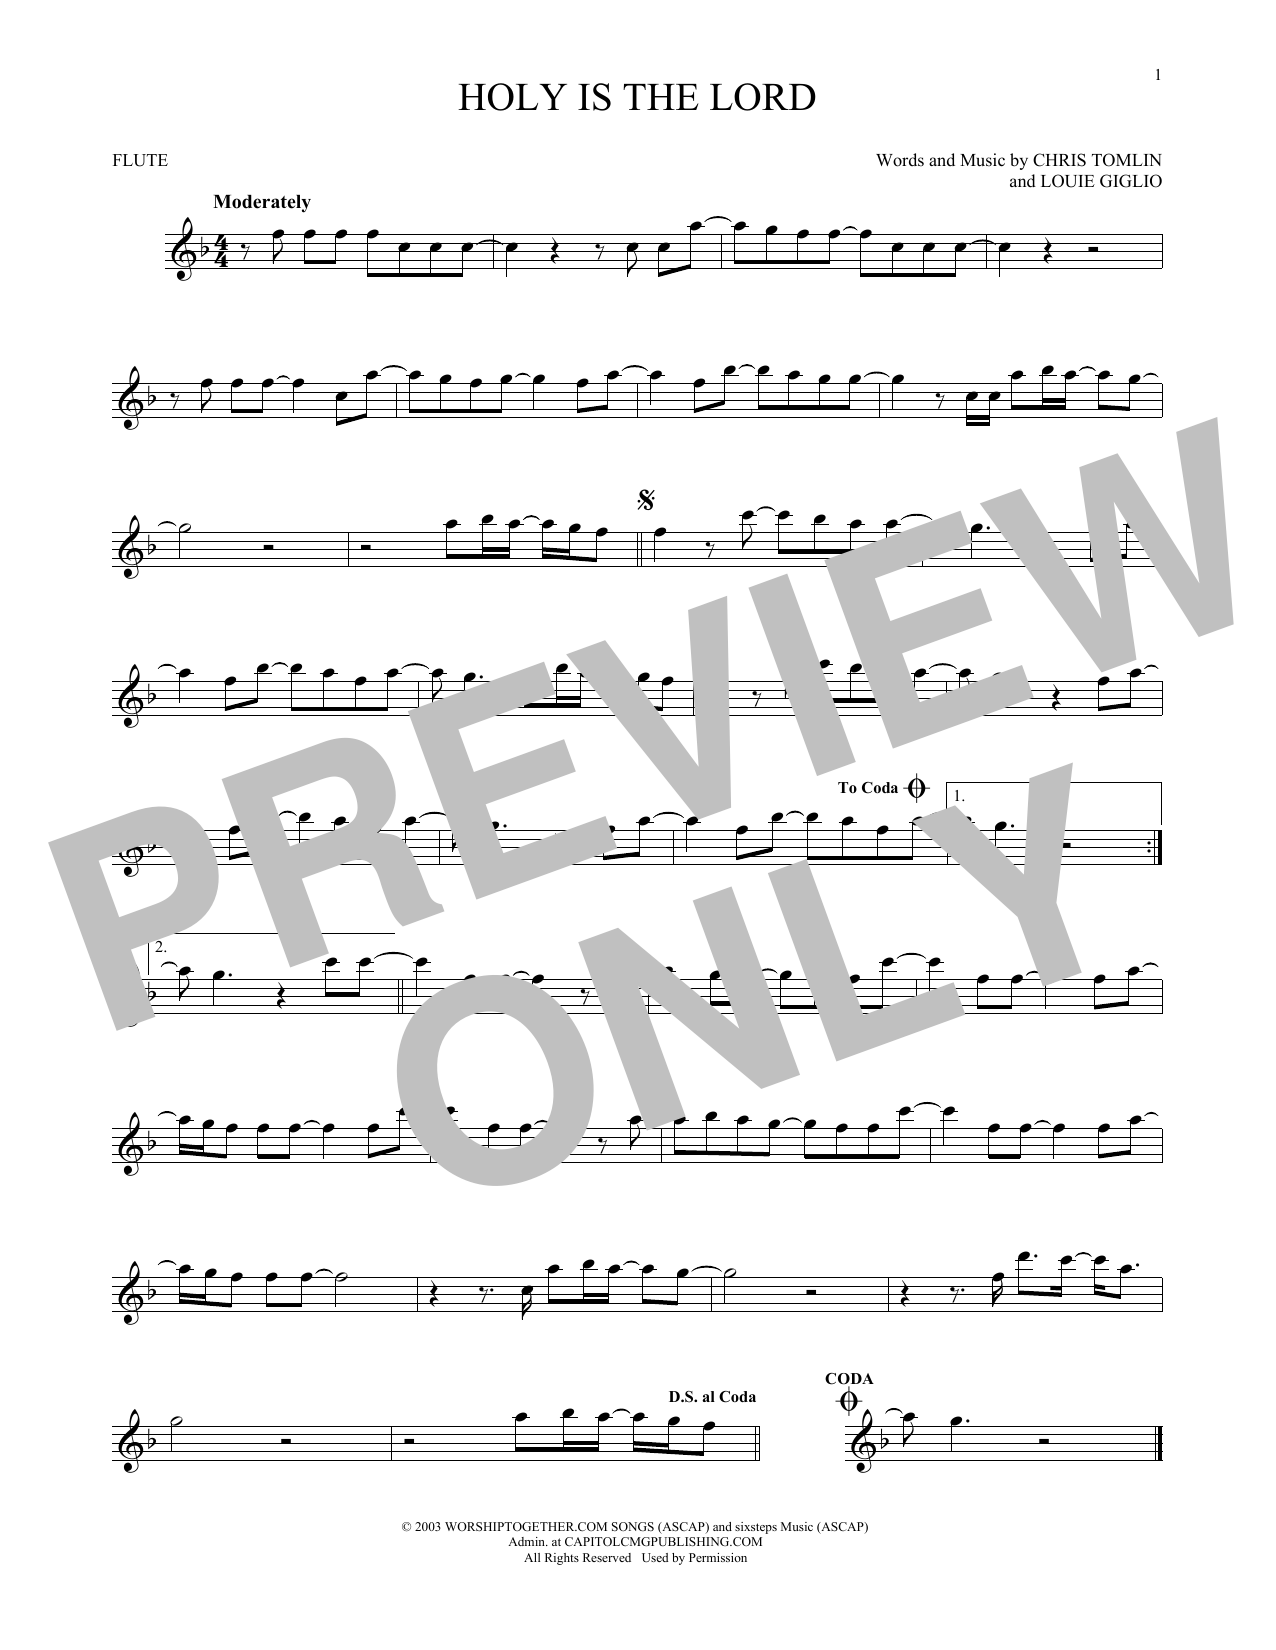 Chris Tomlin Holy Is The Lord sheet music notes printable PDF score